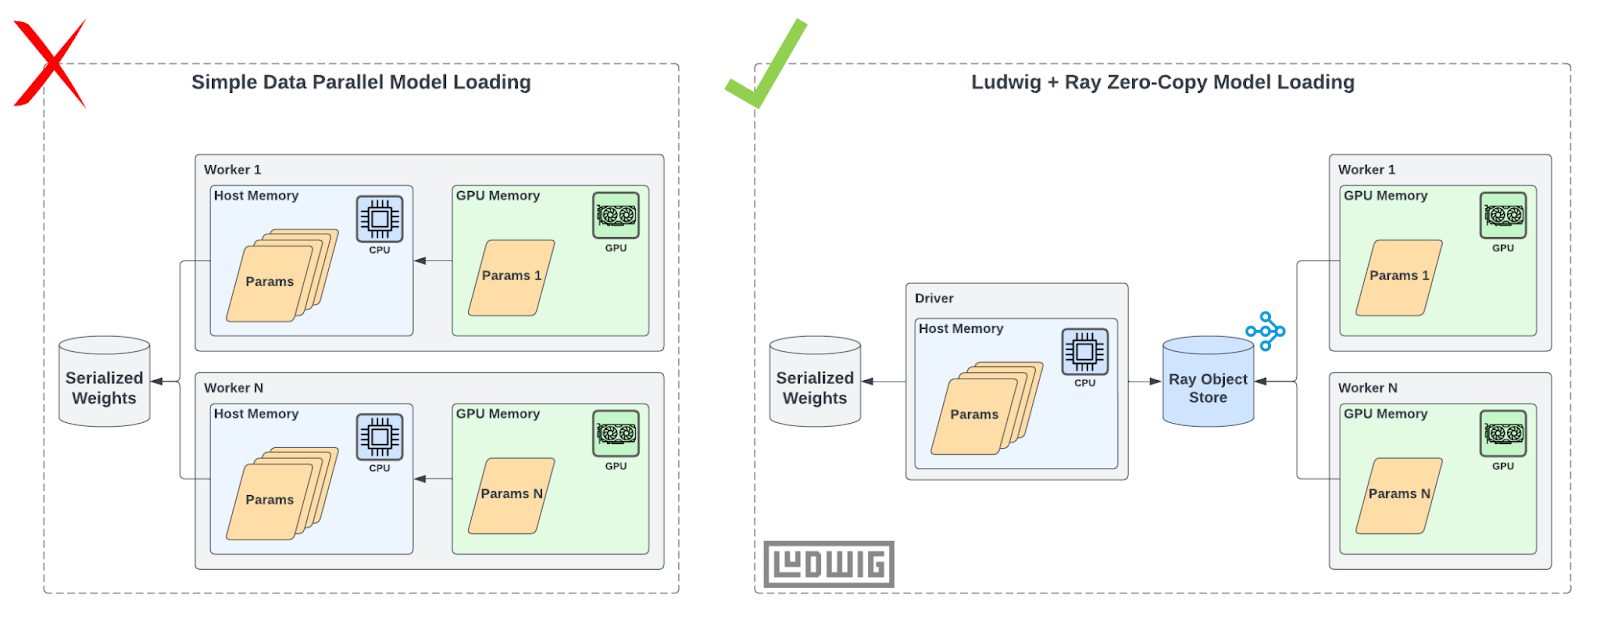 Comparing simple data parallel model loading with Ludwig + Ray zero-copy model loading.